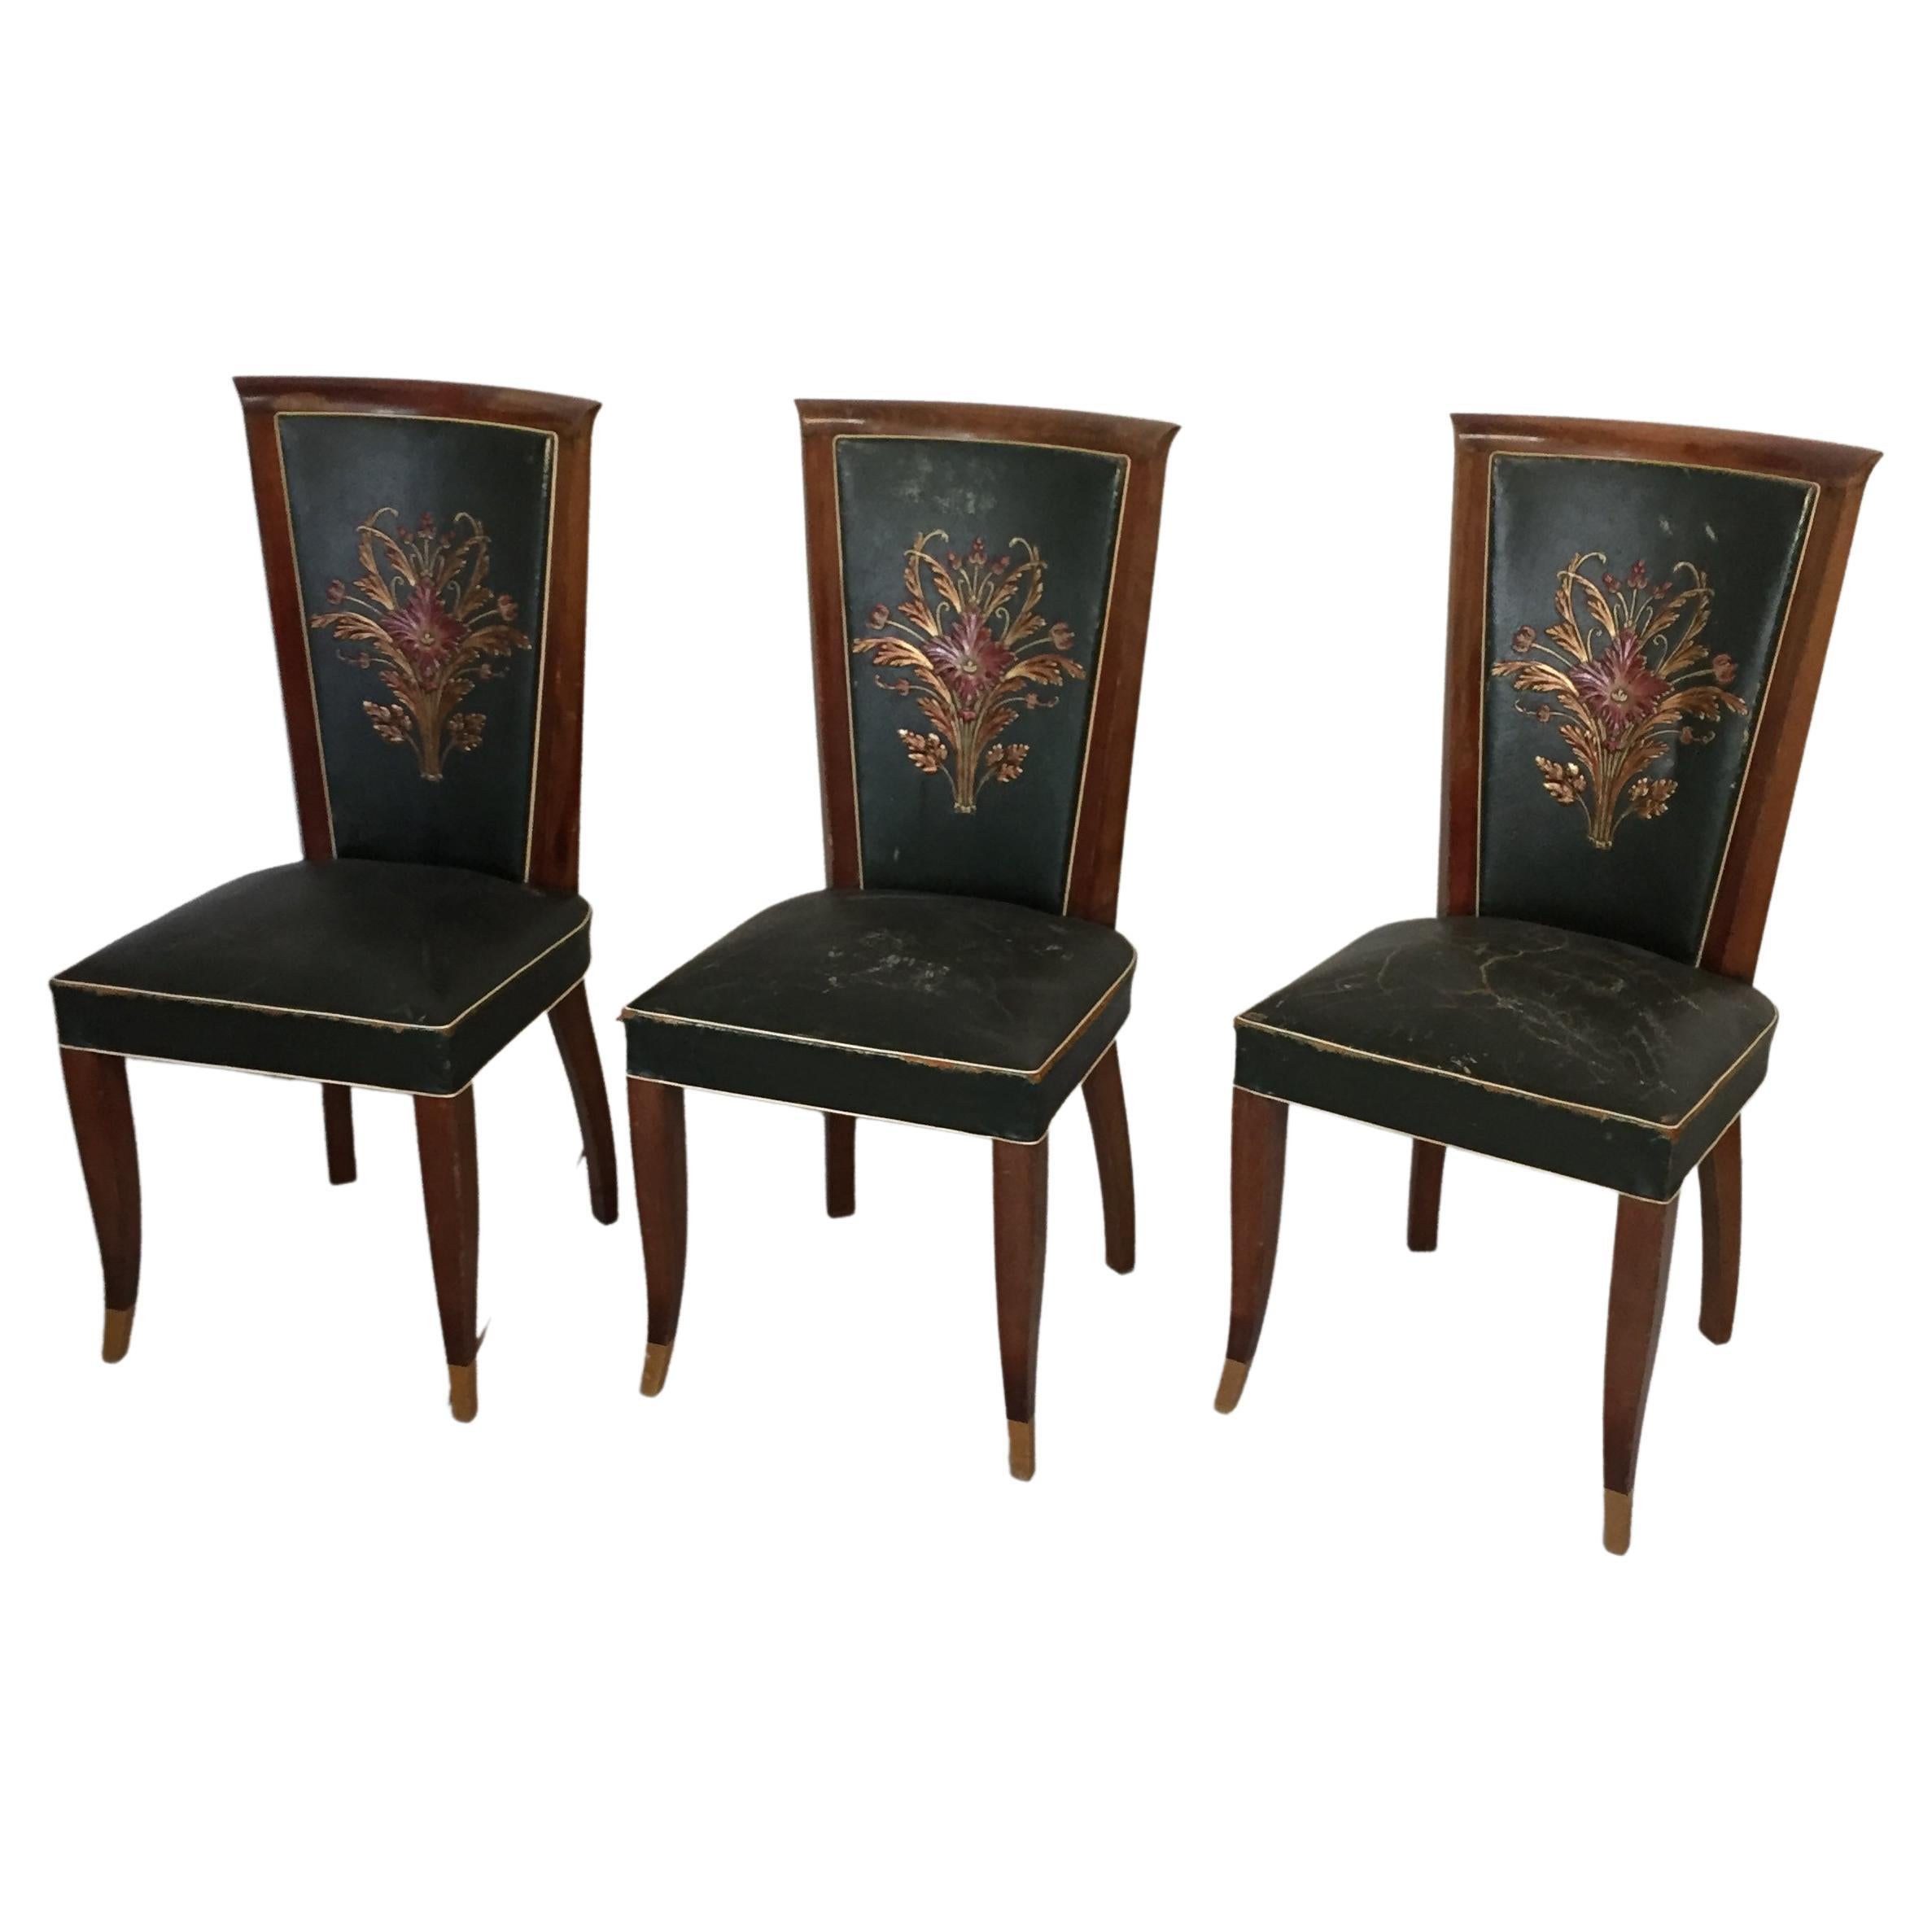 Six Art Deco Chairs in Green Leather Original Condition